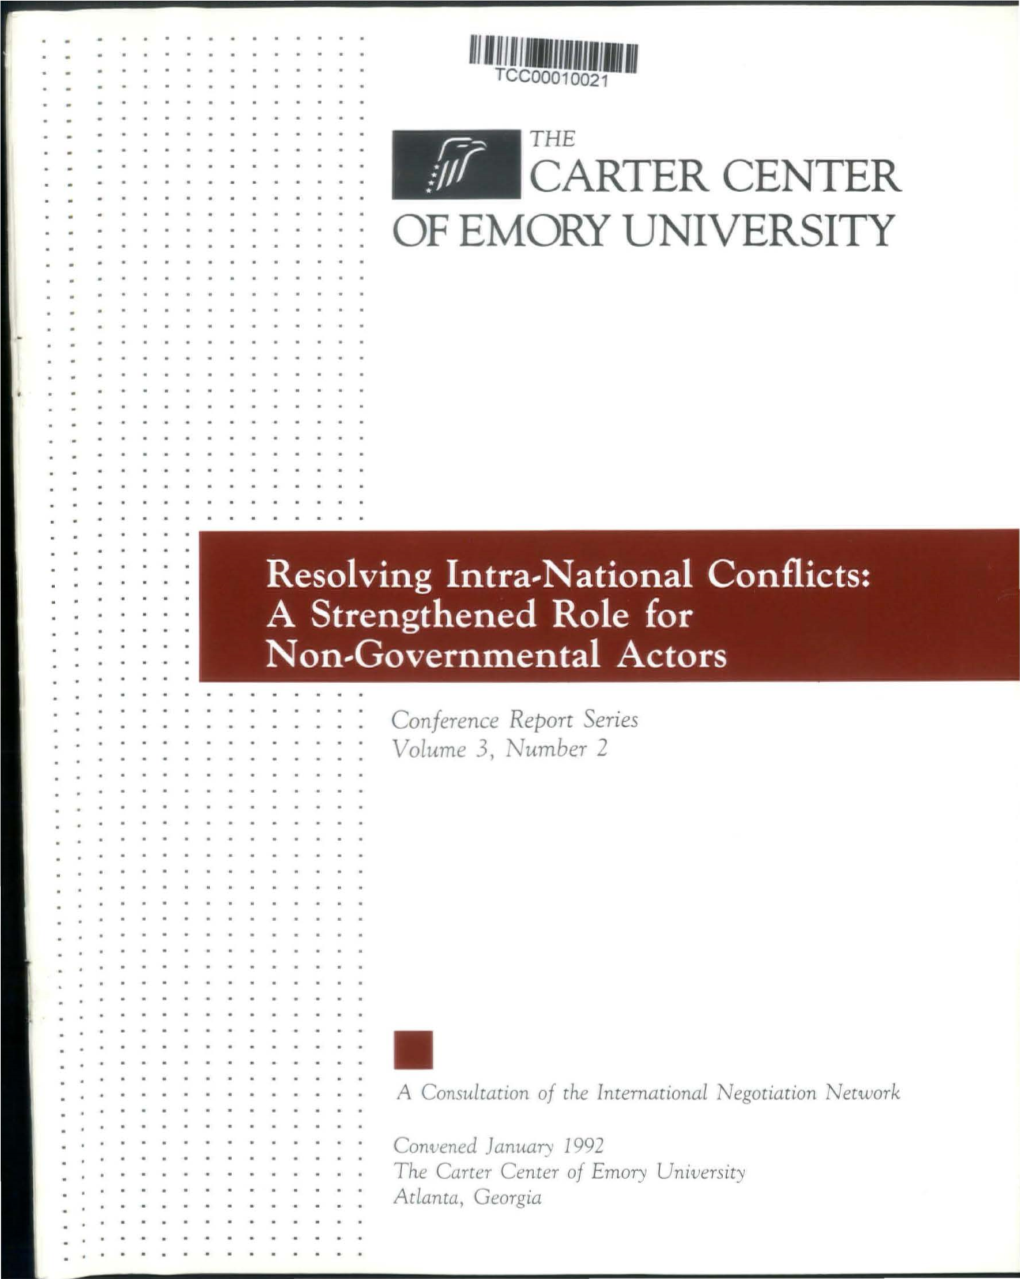 Resolving Intra-National Conflicts